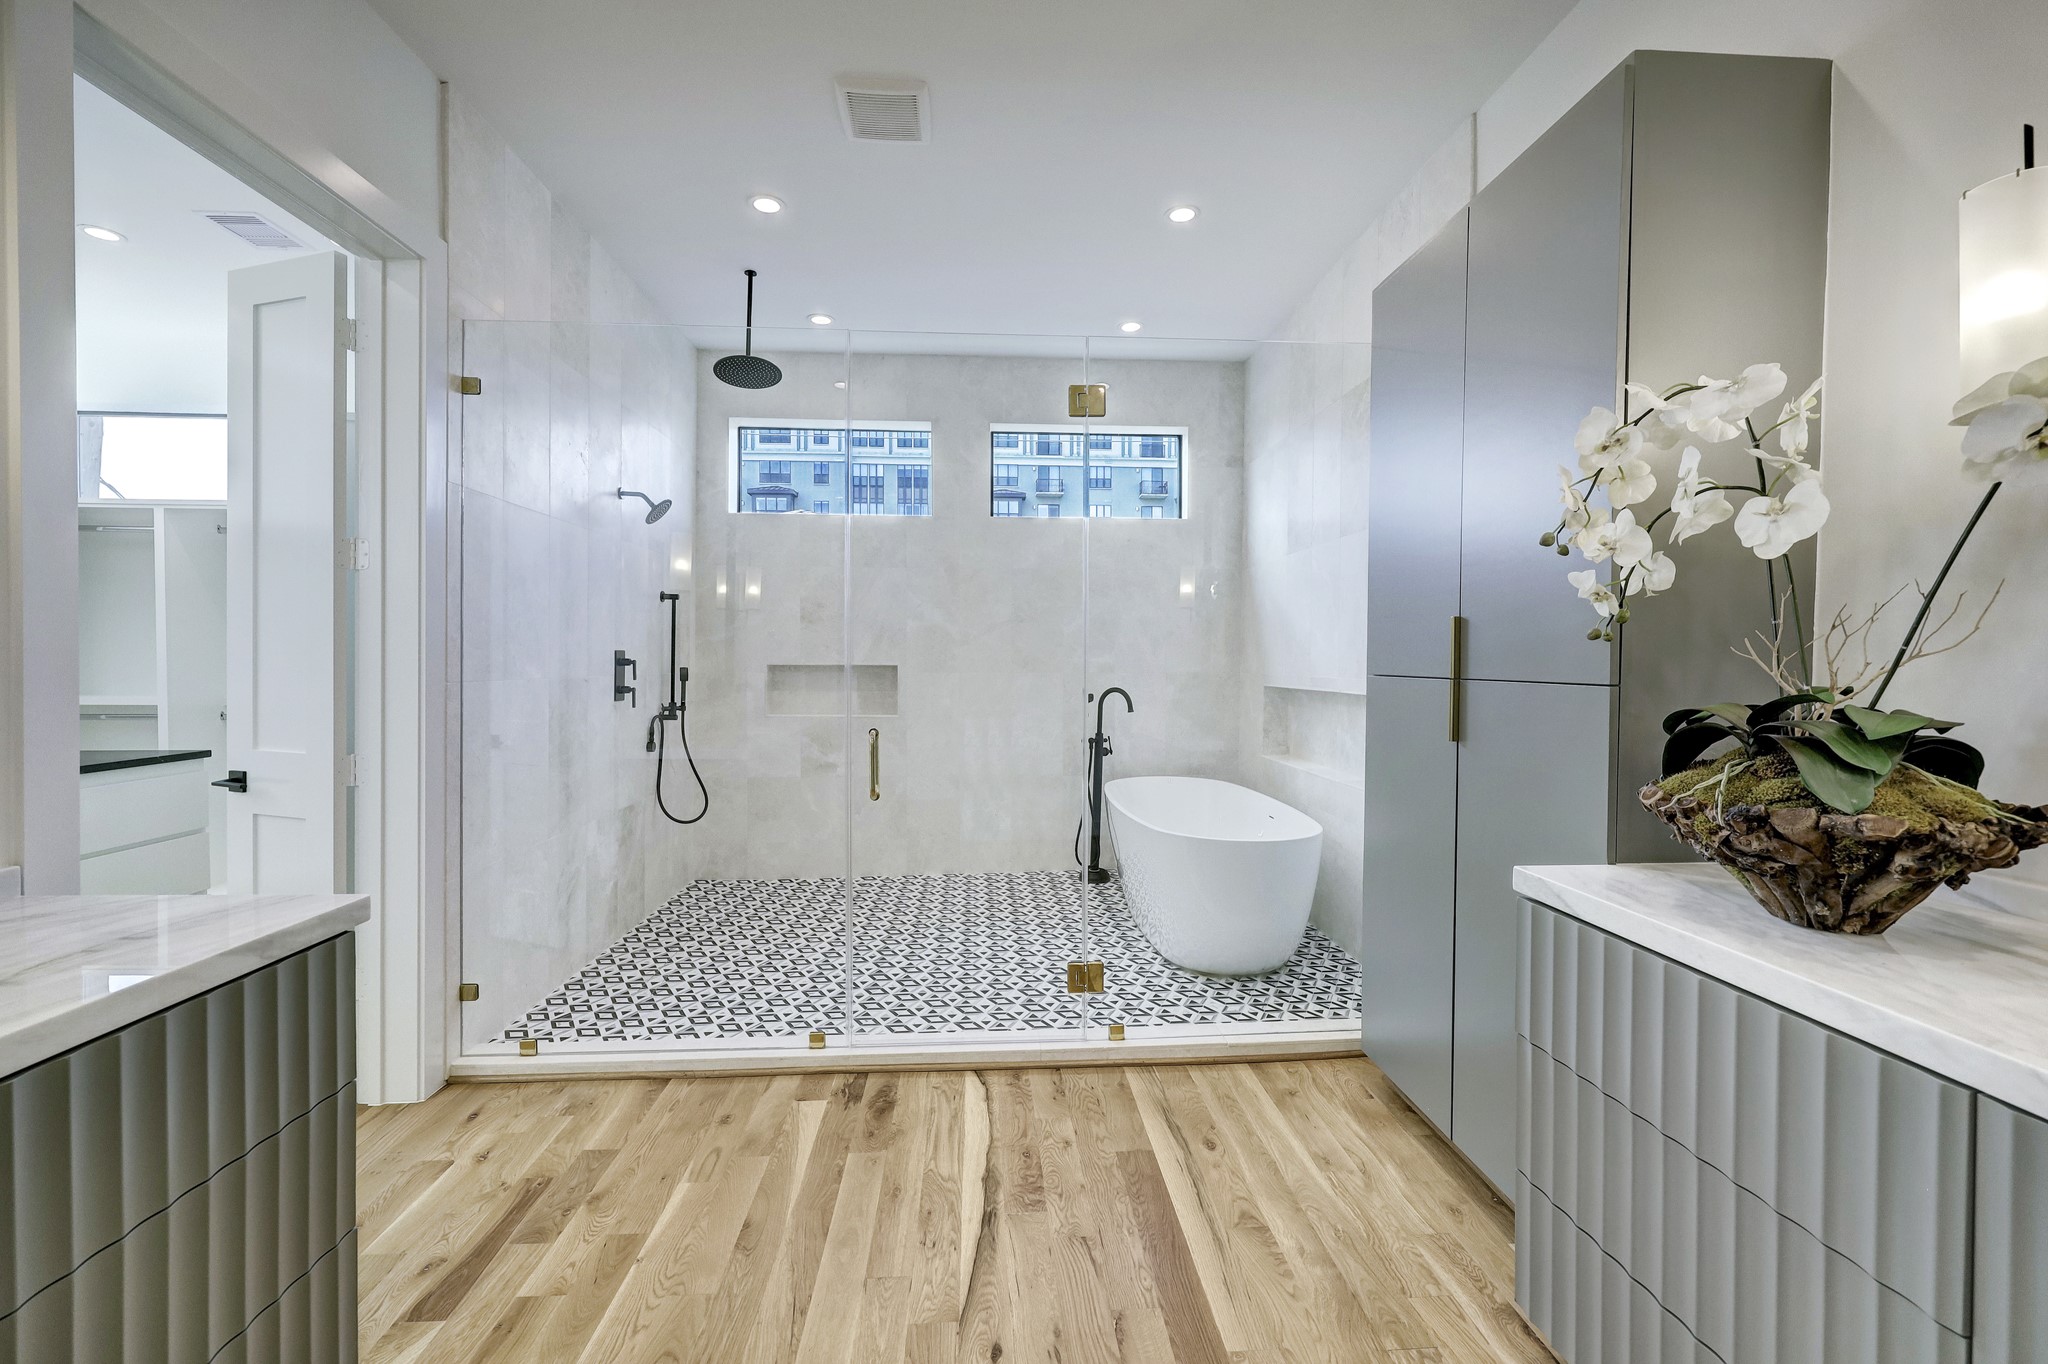  marble primary bath offering glass enclosed wet room plus dual counters